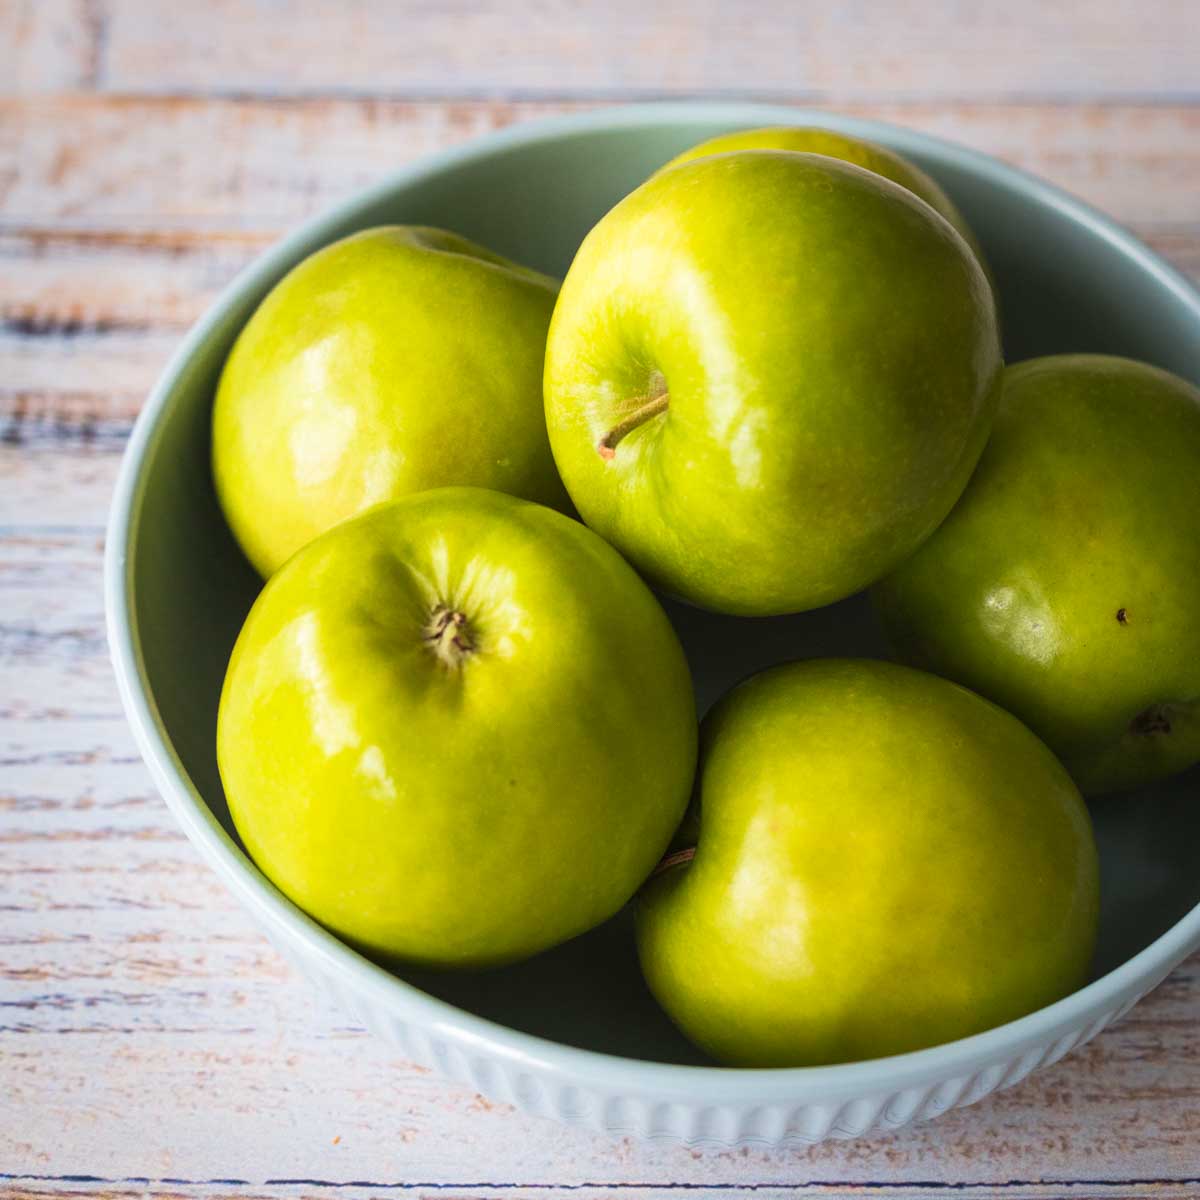 A bowl full of Granny Smith apples sits on a table.